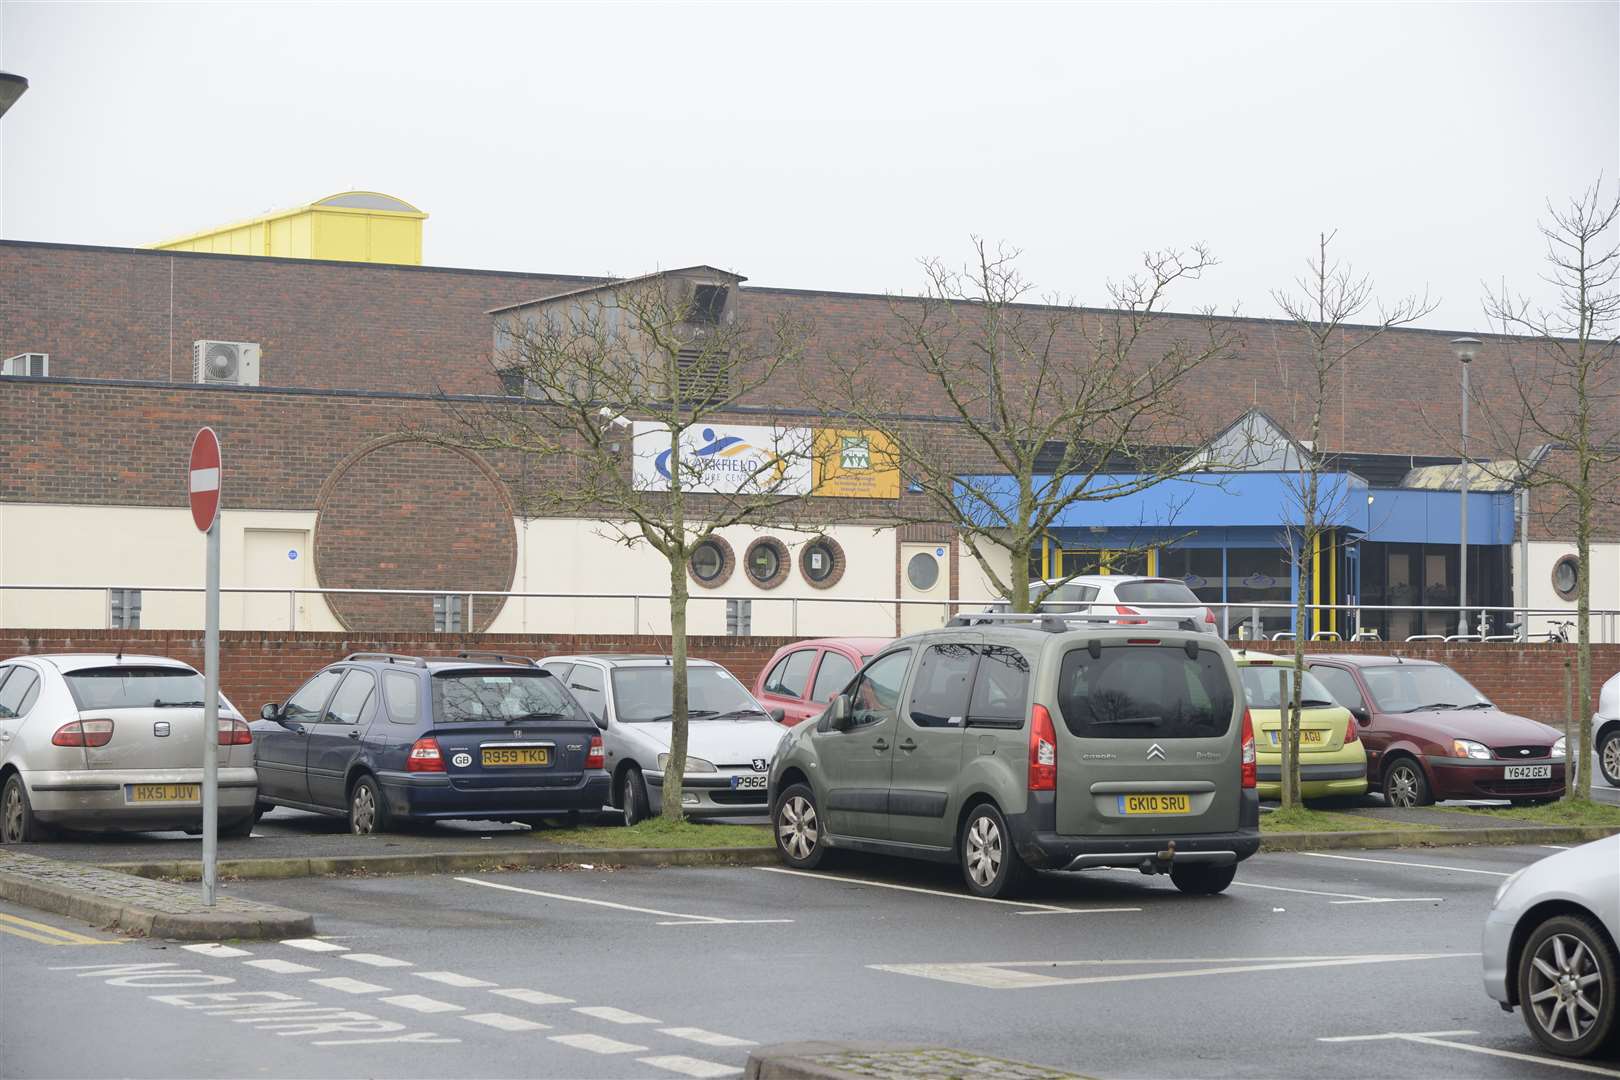 The car park at Larkfield Leisure Centre is under threat